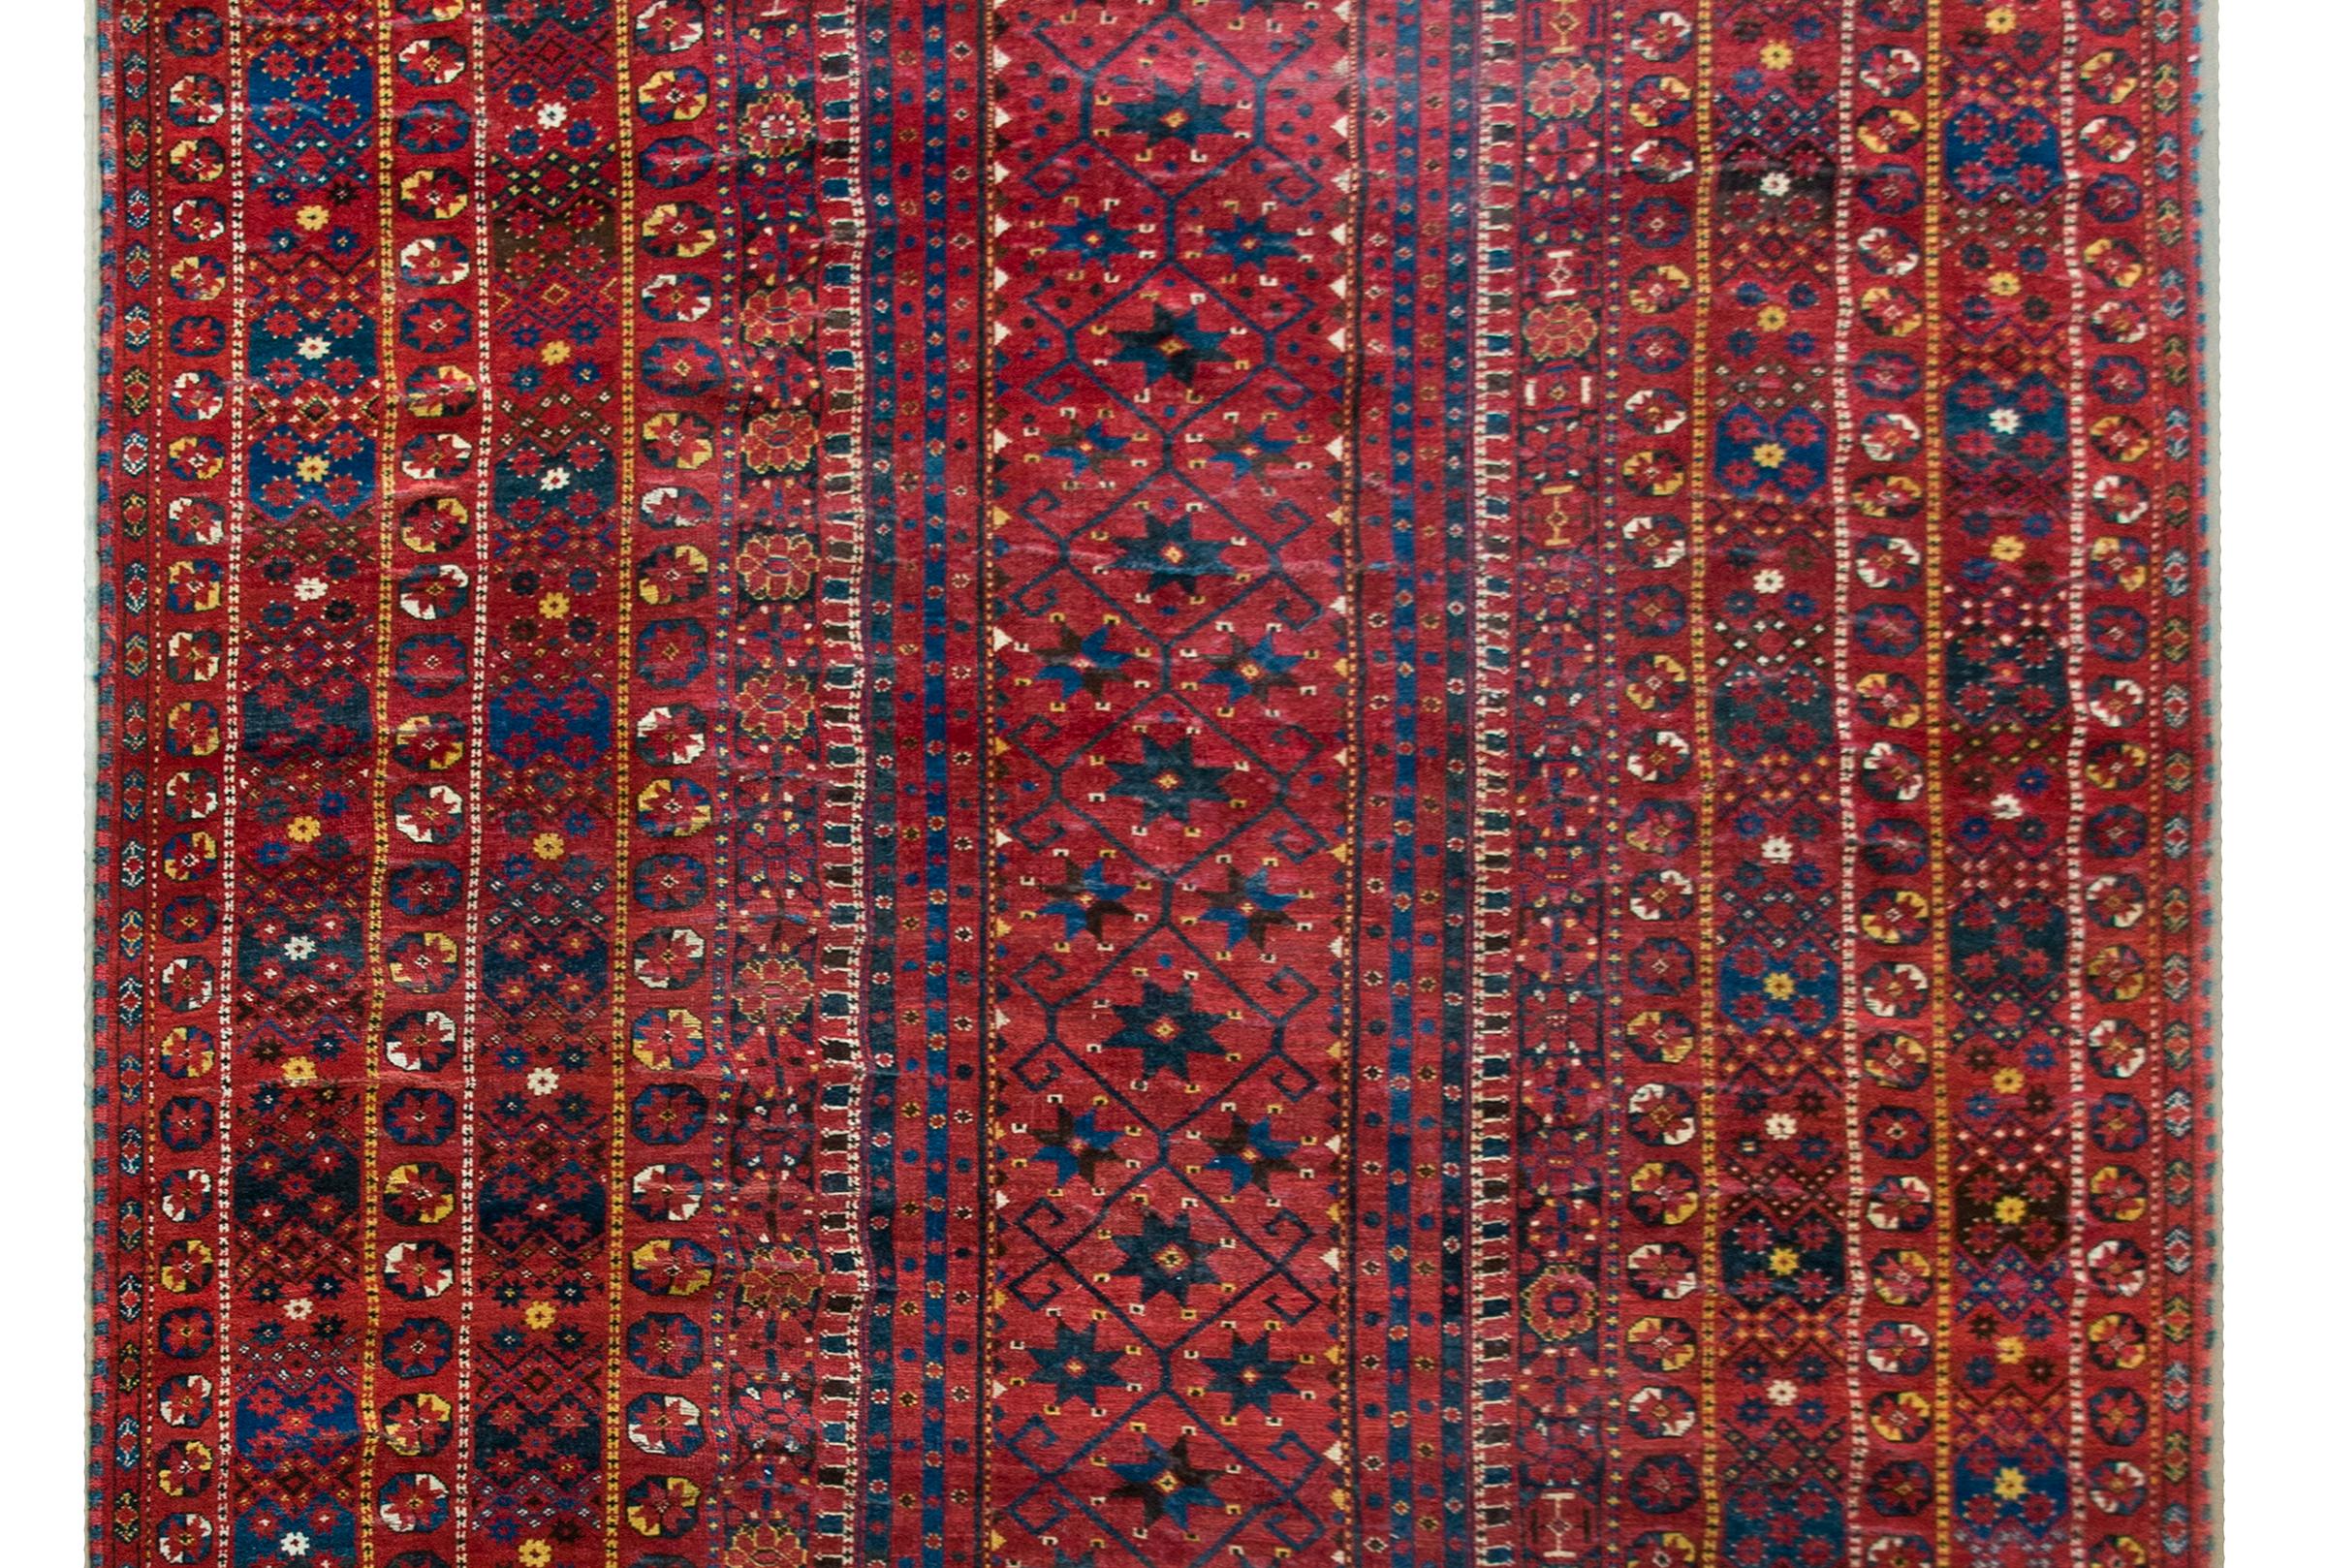 A striking and rare late 19th century Persian Afghani Bashir rug with a narrow central field of stylized flowers with a scrolling vines and surrounded by an unusually wide border composed of multiple different petite stylized flowers, and all woven